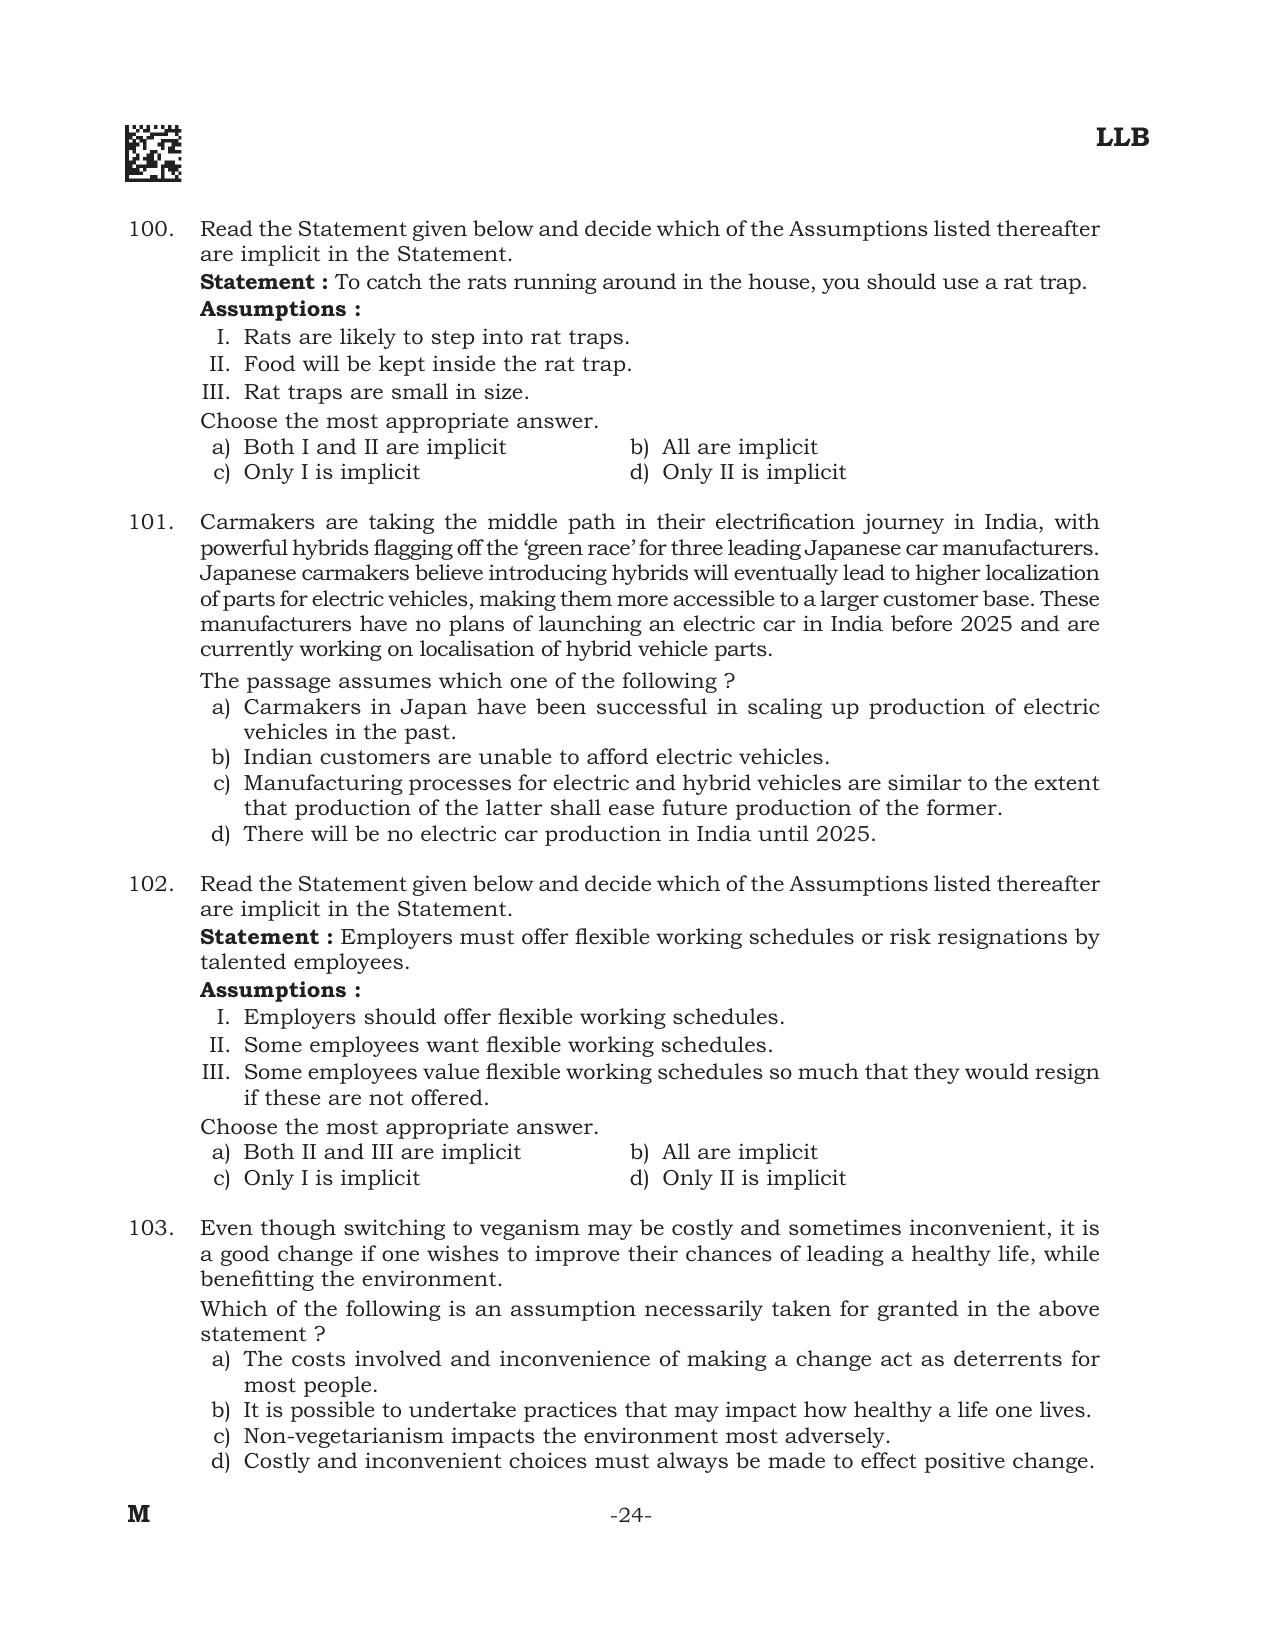 AILET 2022 Question Paper for BA LLB - Page 24